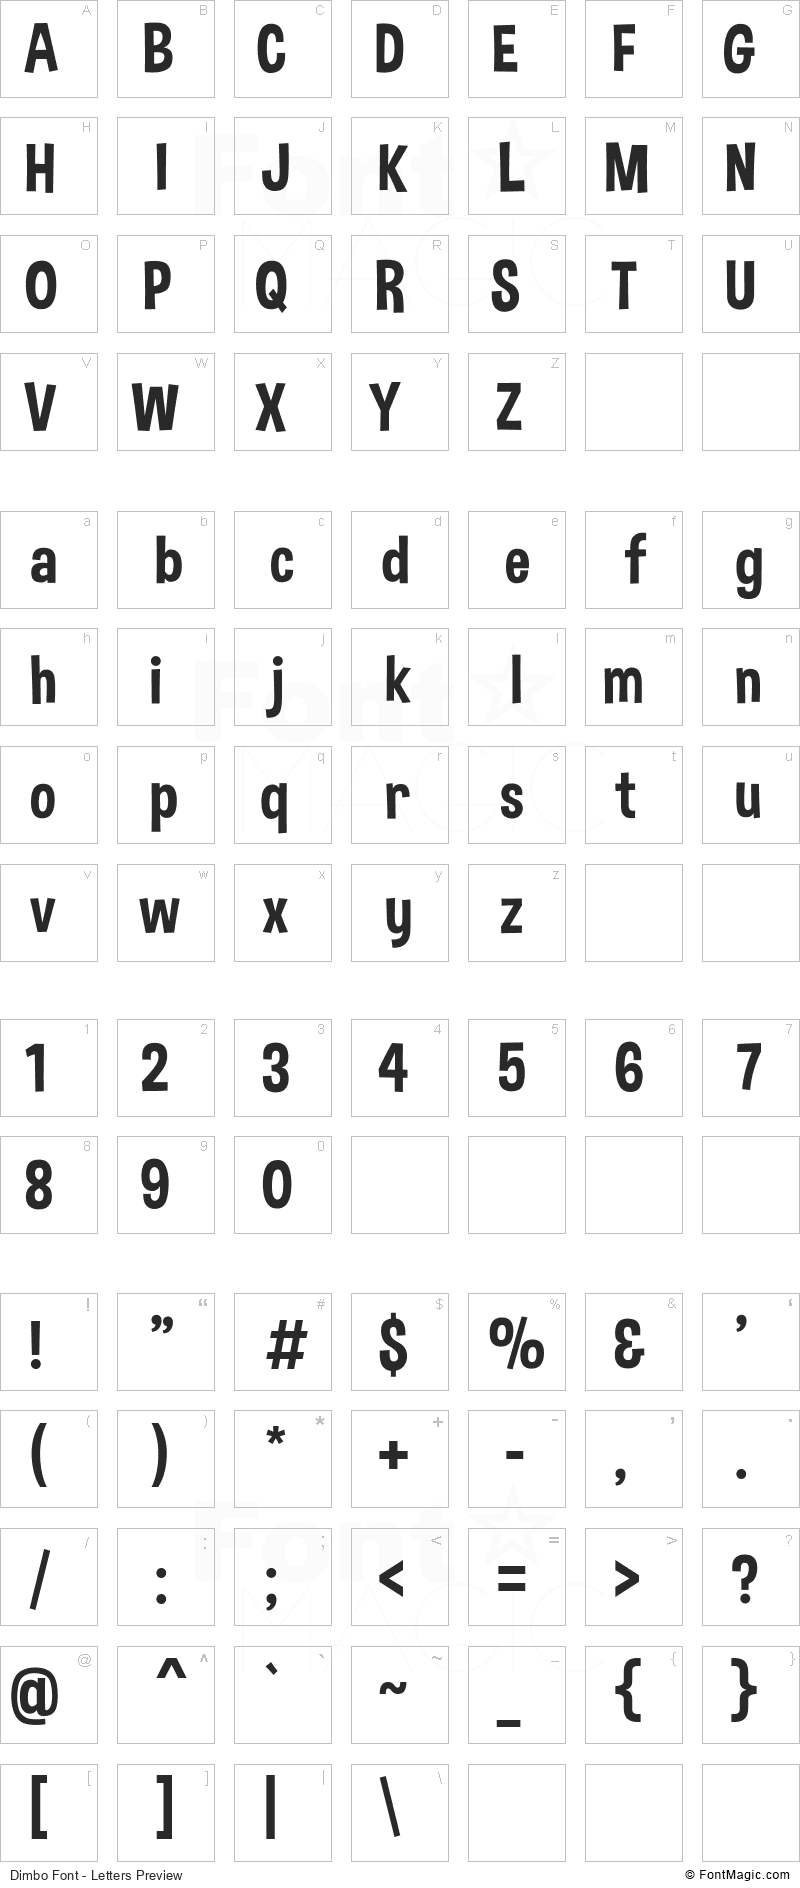 Dimbo Font - All Latters Preview Chart